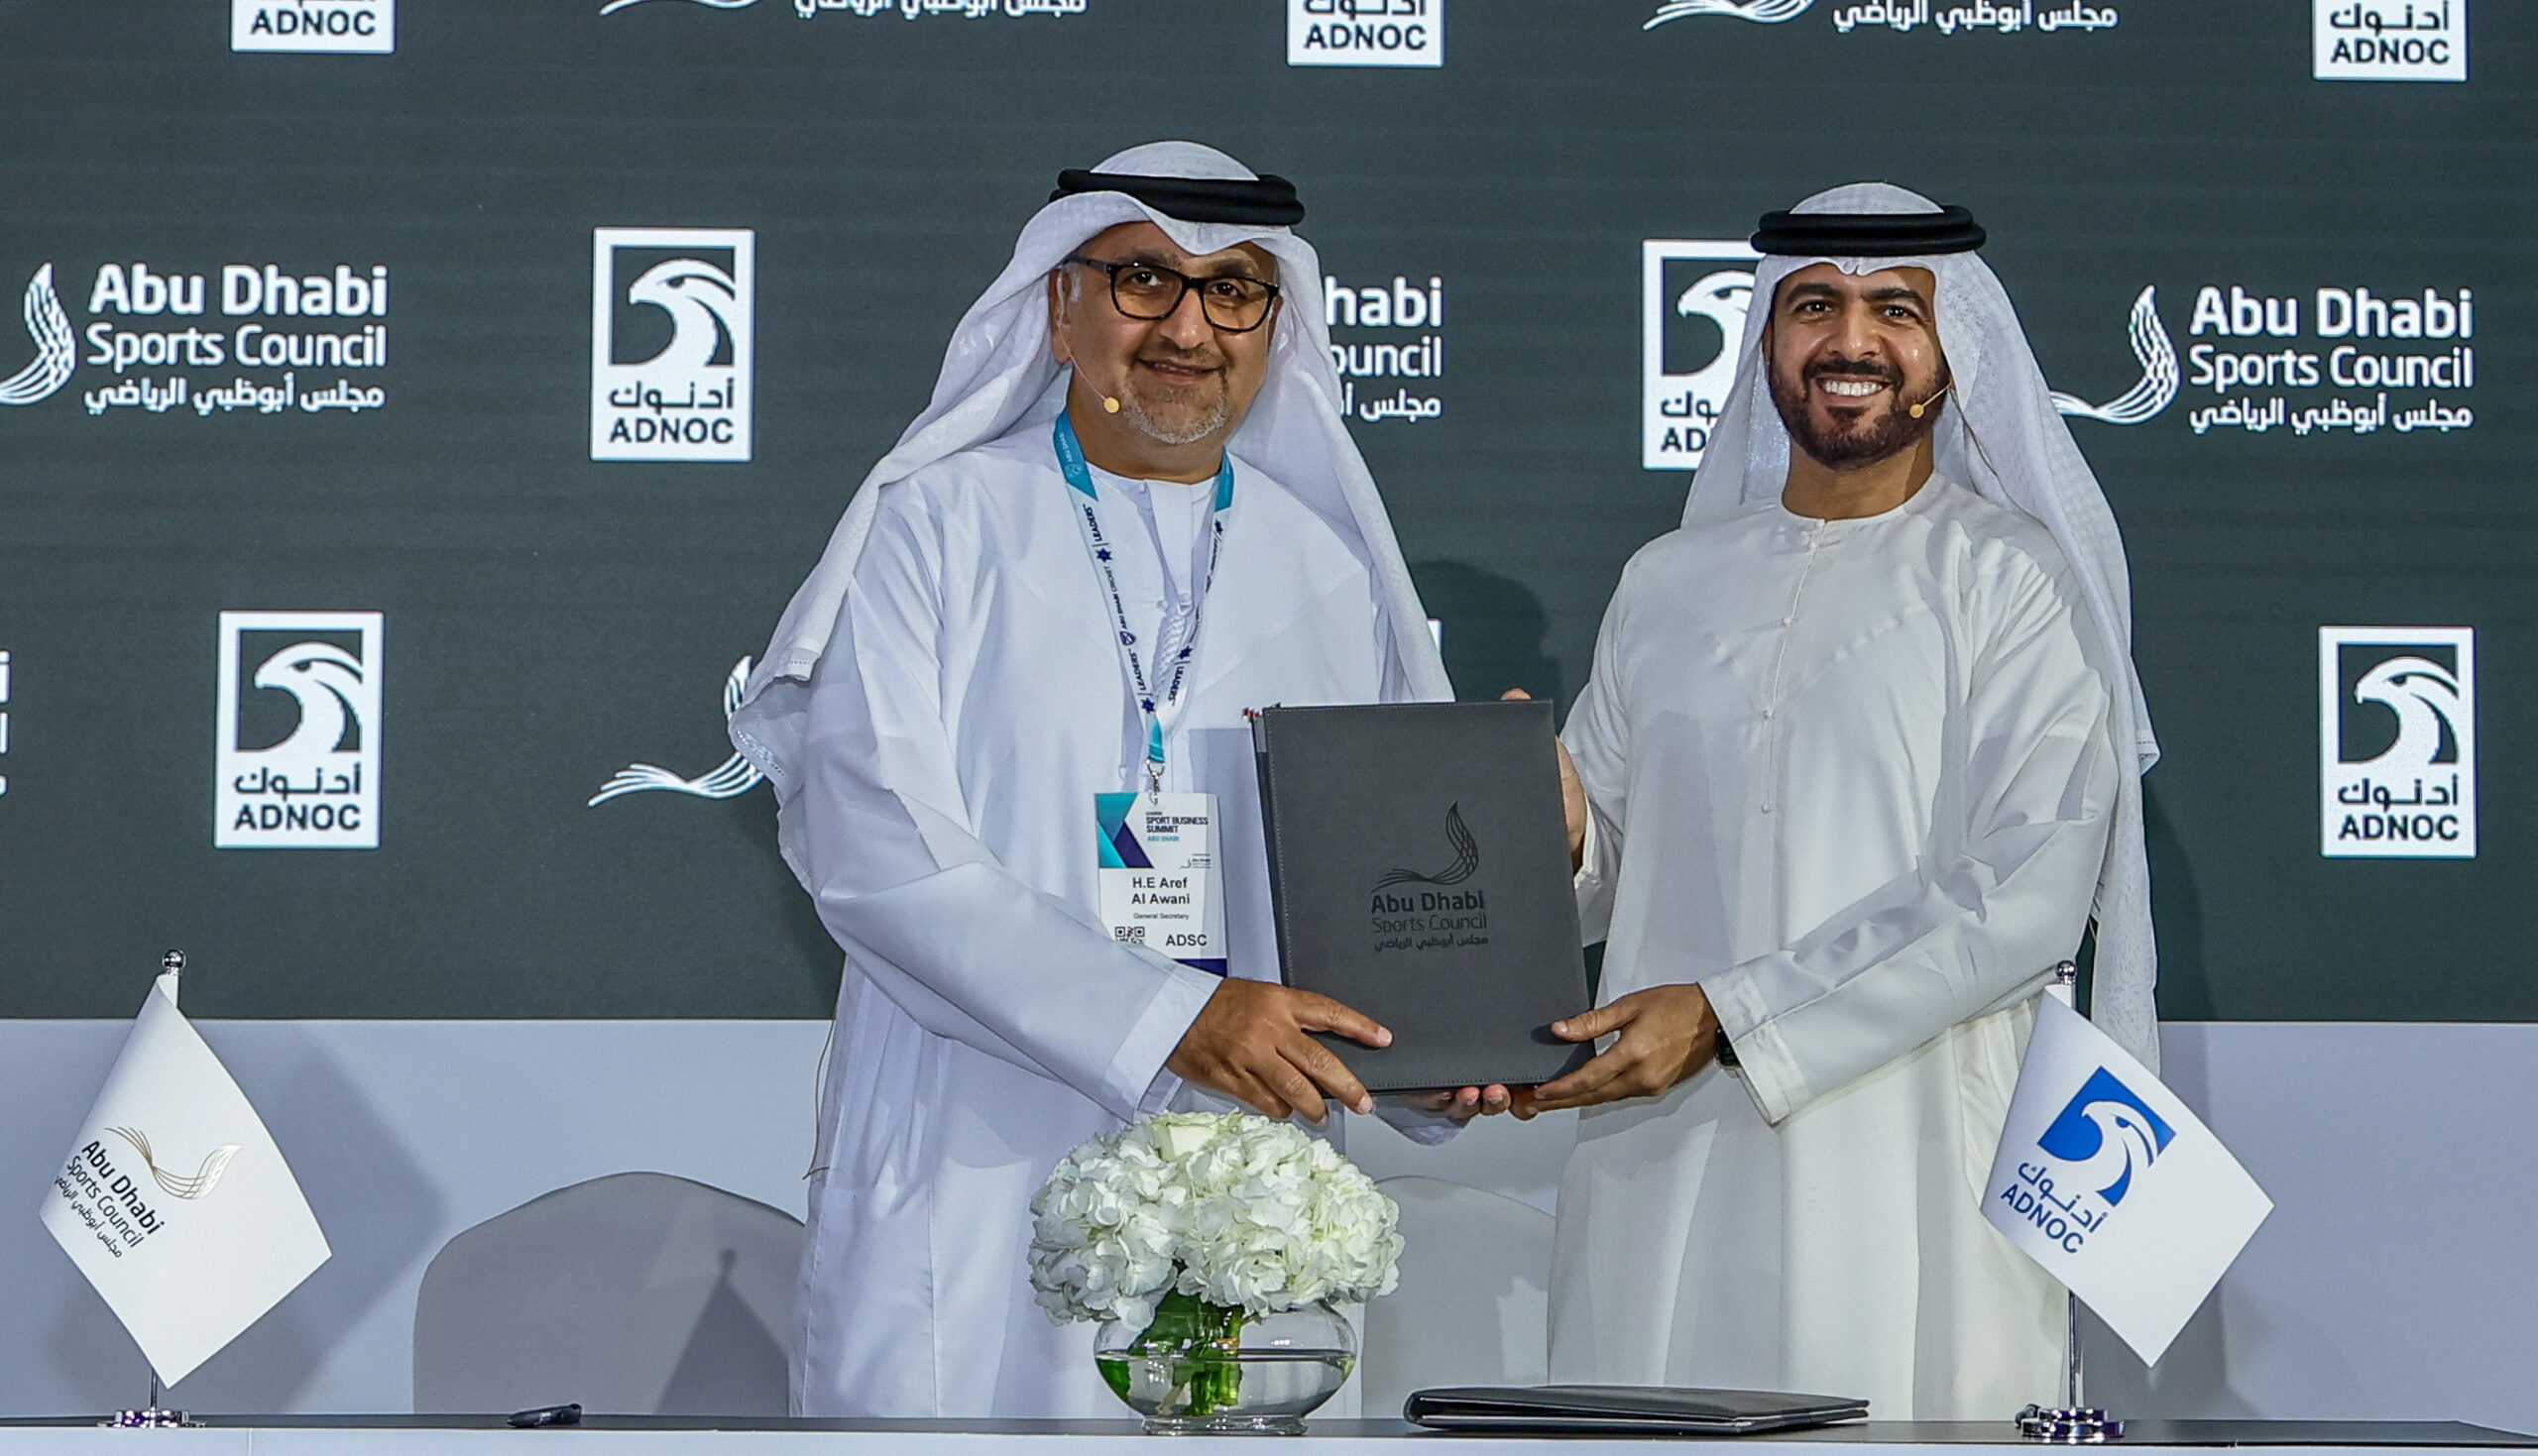 ADNOC Abu Dhabi Marathon Returns In December With A Commitment To Grow The Uae’s Running Community